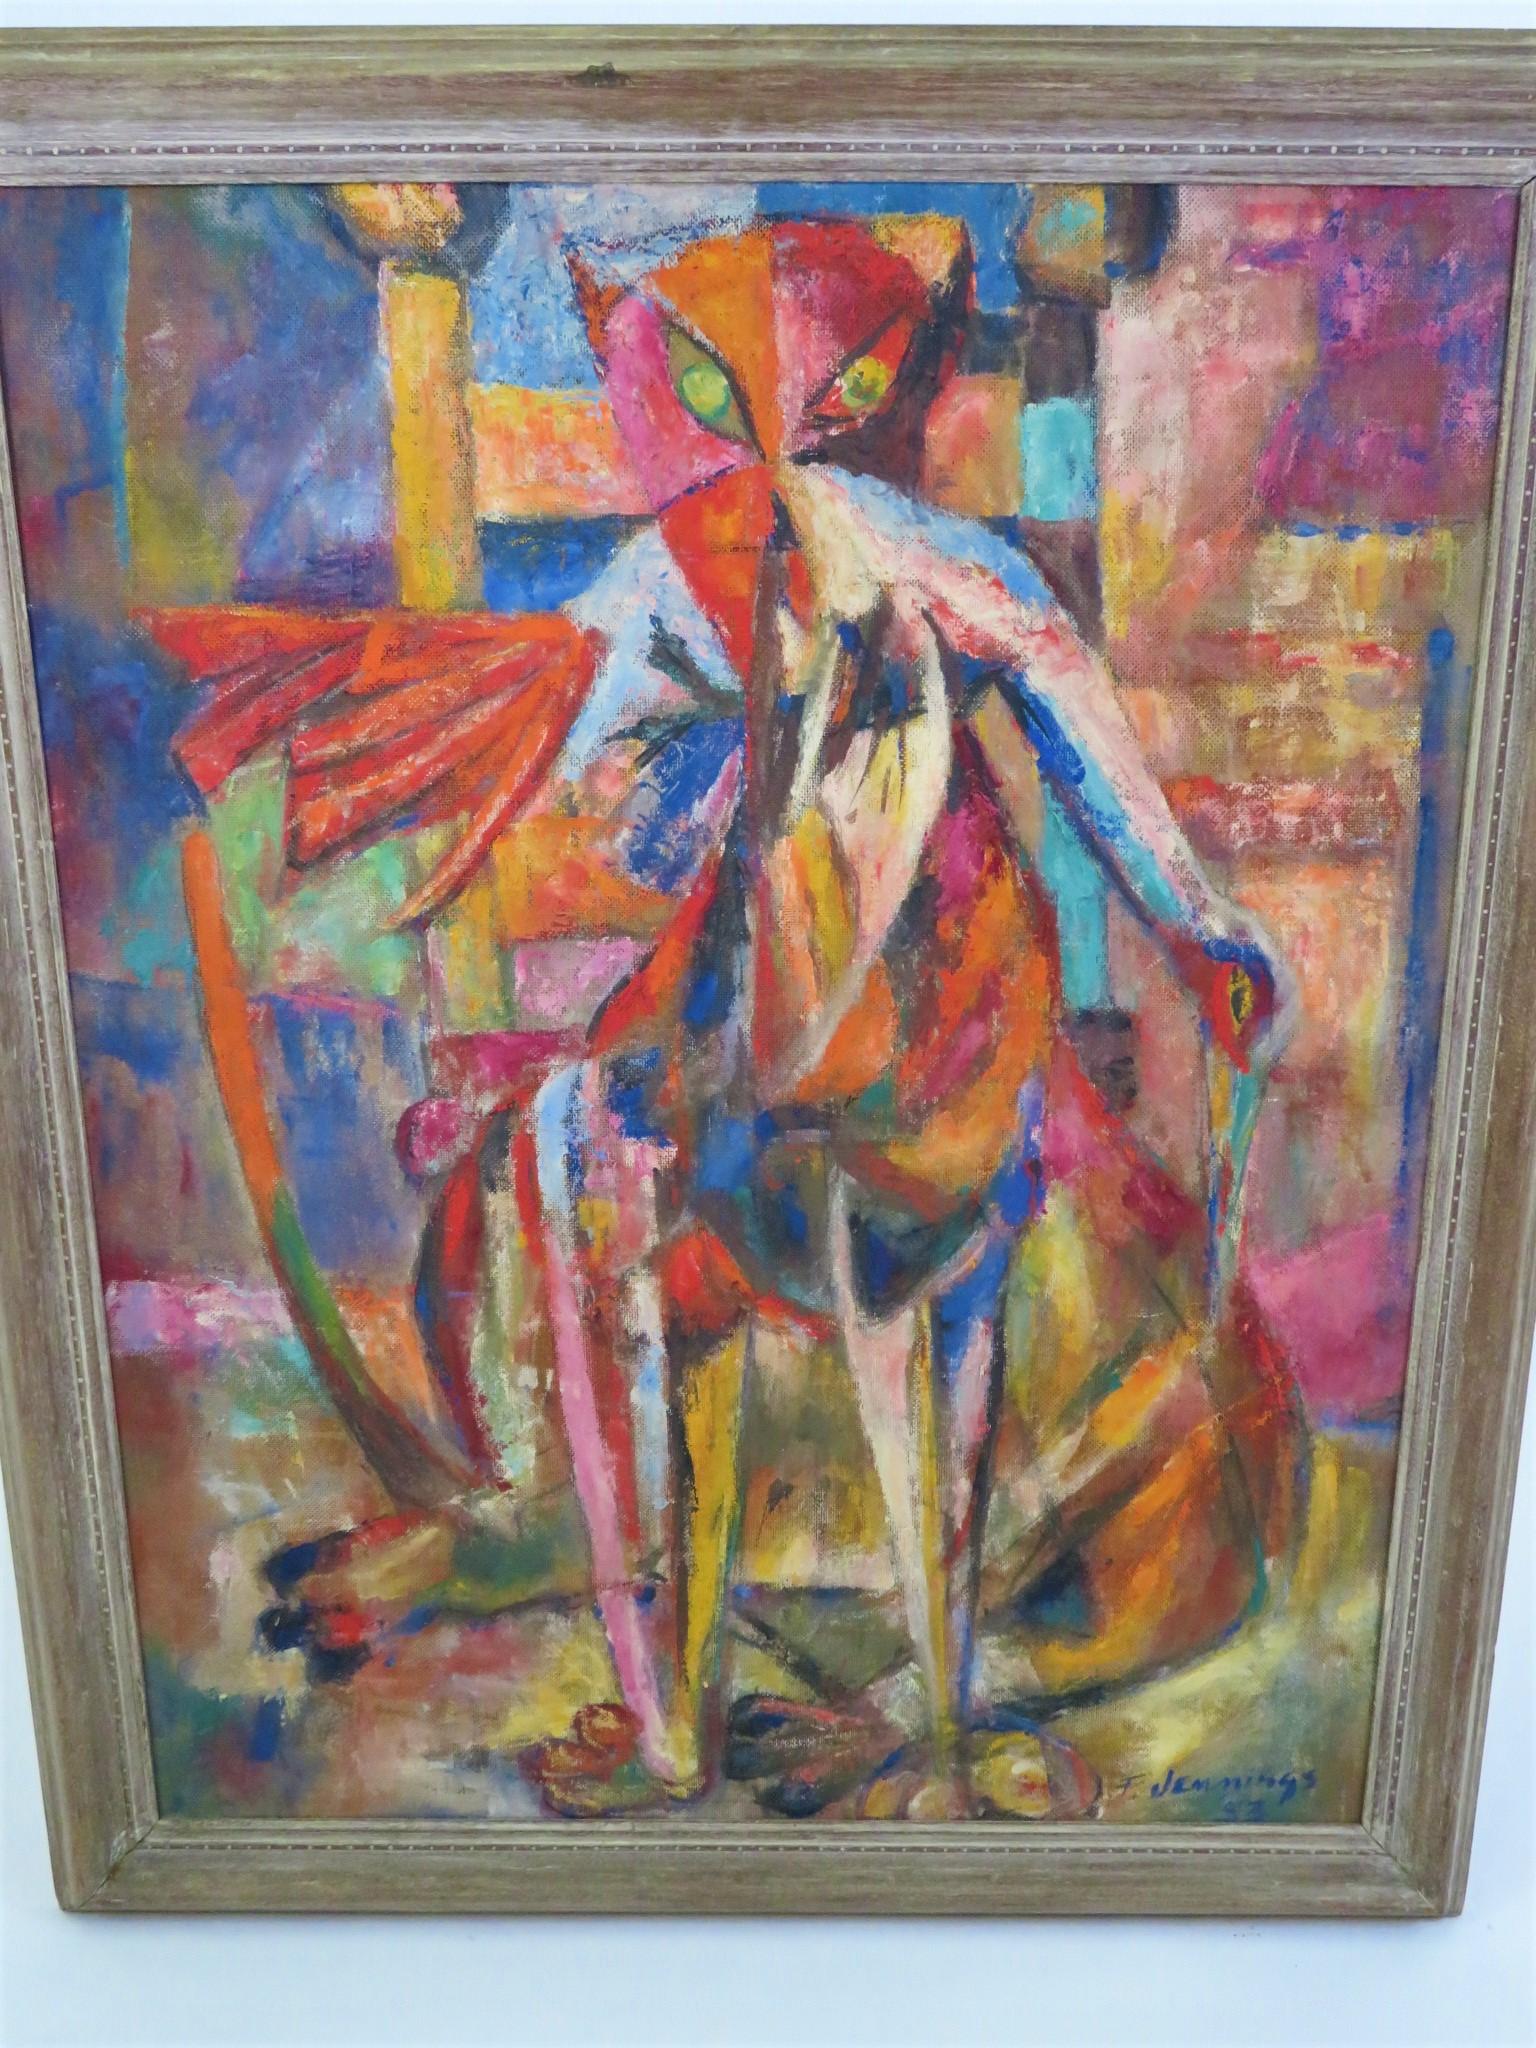 Francis Jennings (b. Wilmington, DE 1910 - 1993 NYC) painted this framed surreal cubist oil on board in 1953 while residing in NYC. In vivid colors, Jennings depicted a large cat with a large bird in his mouth, probably bringing indoors as a gift to